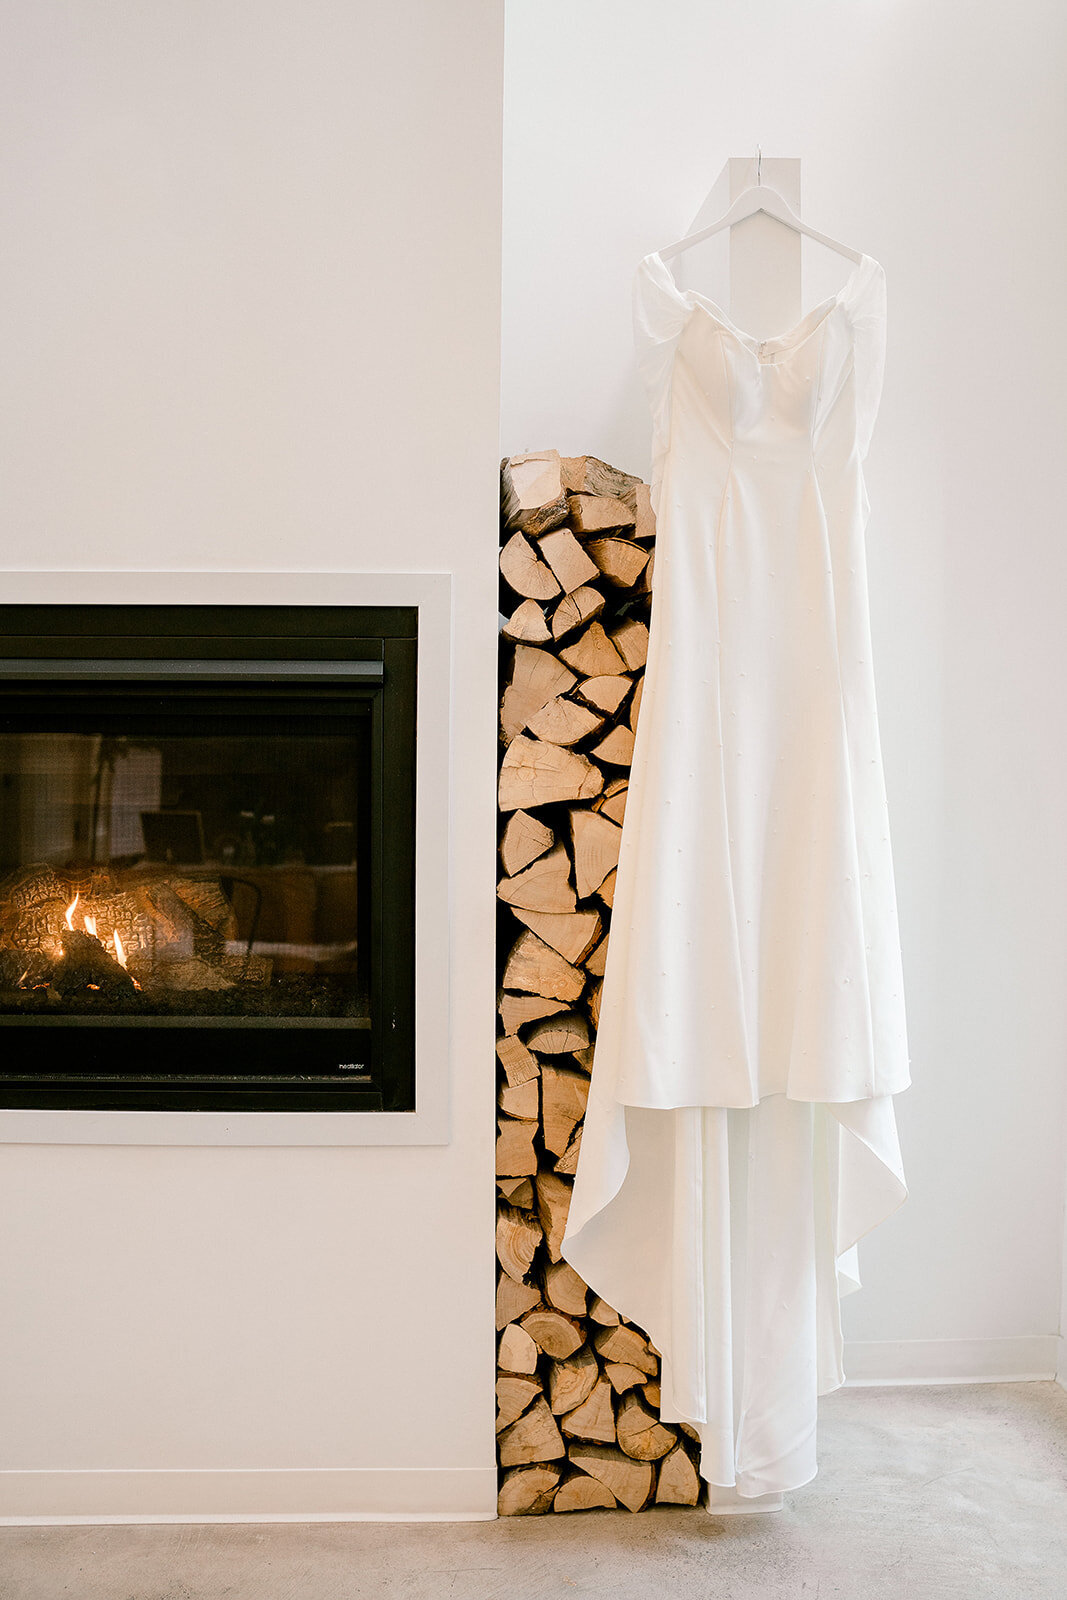 Wedding Dress hanging by a fireplace with firewood at Pinewood Wedding Venue